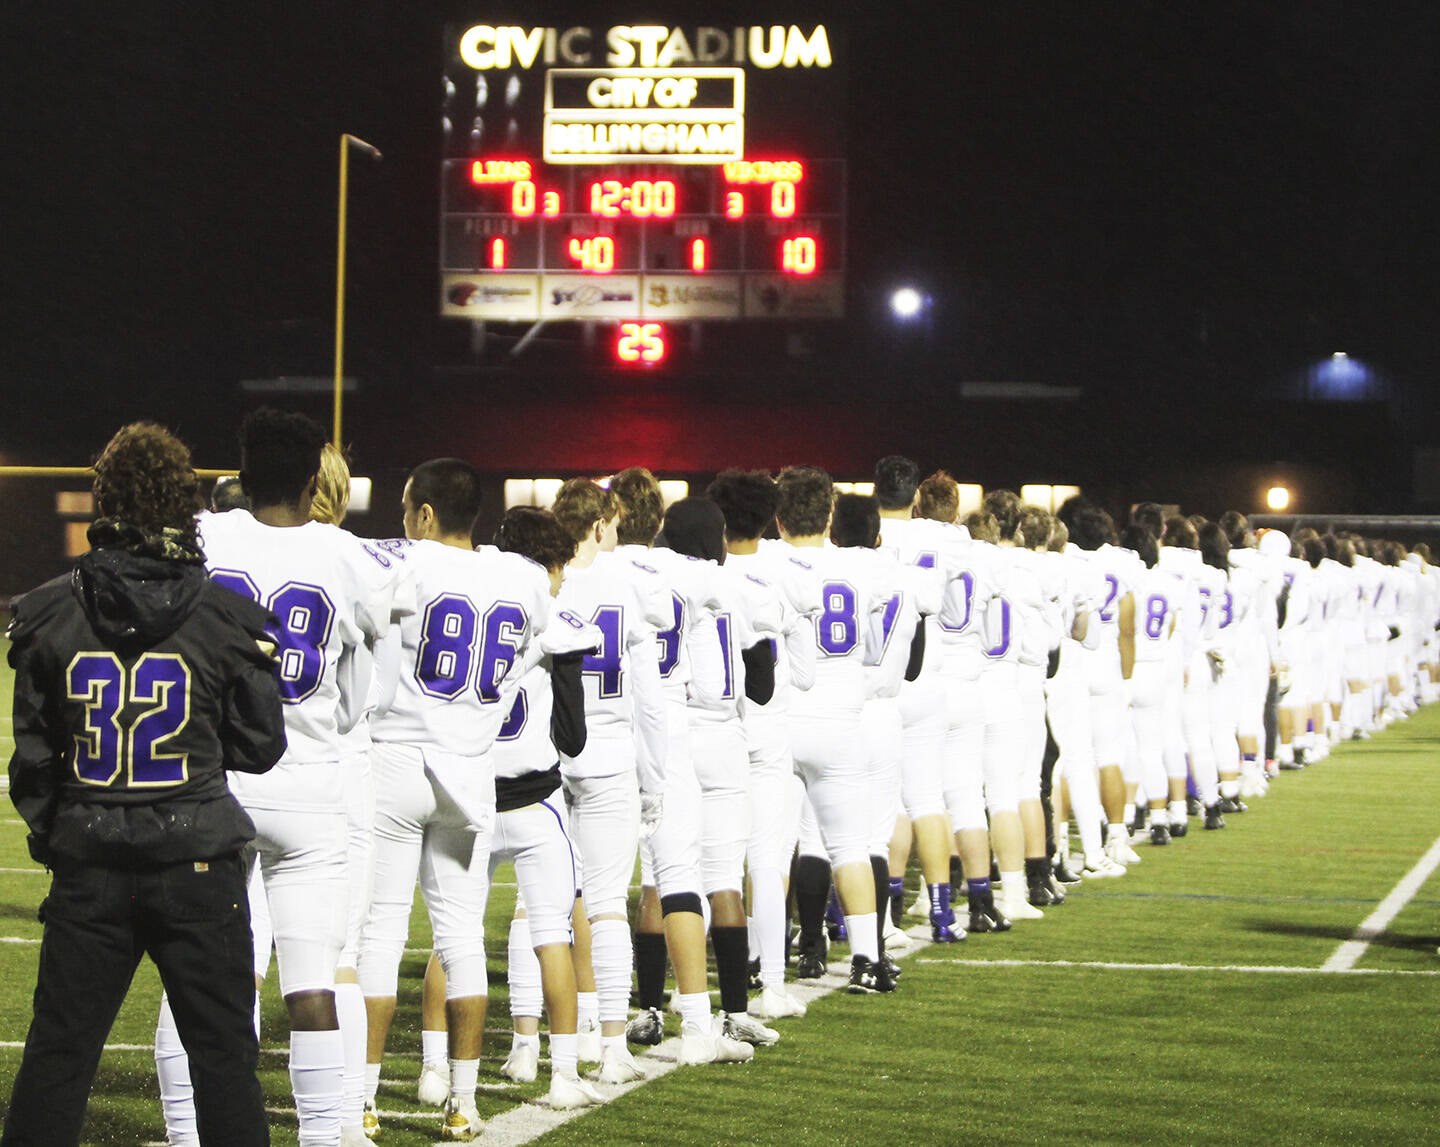 The North Kitsap football team lines up at the start of the game.